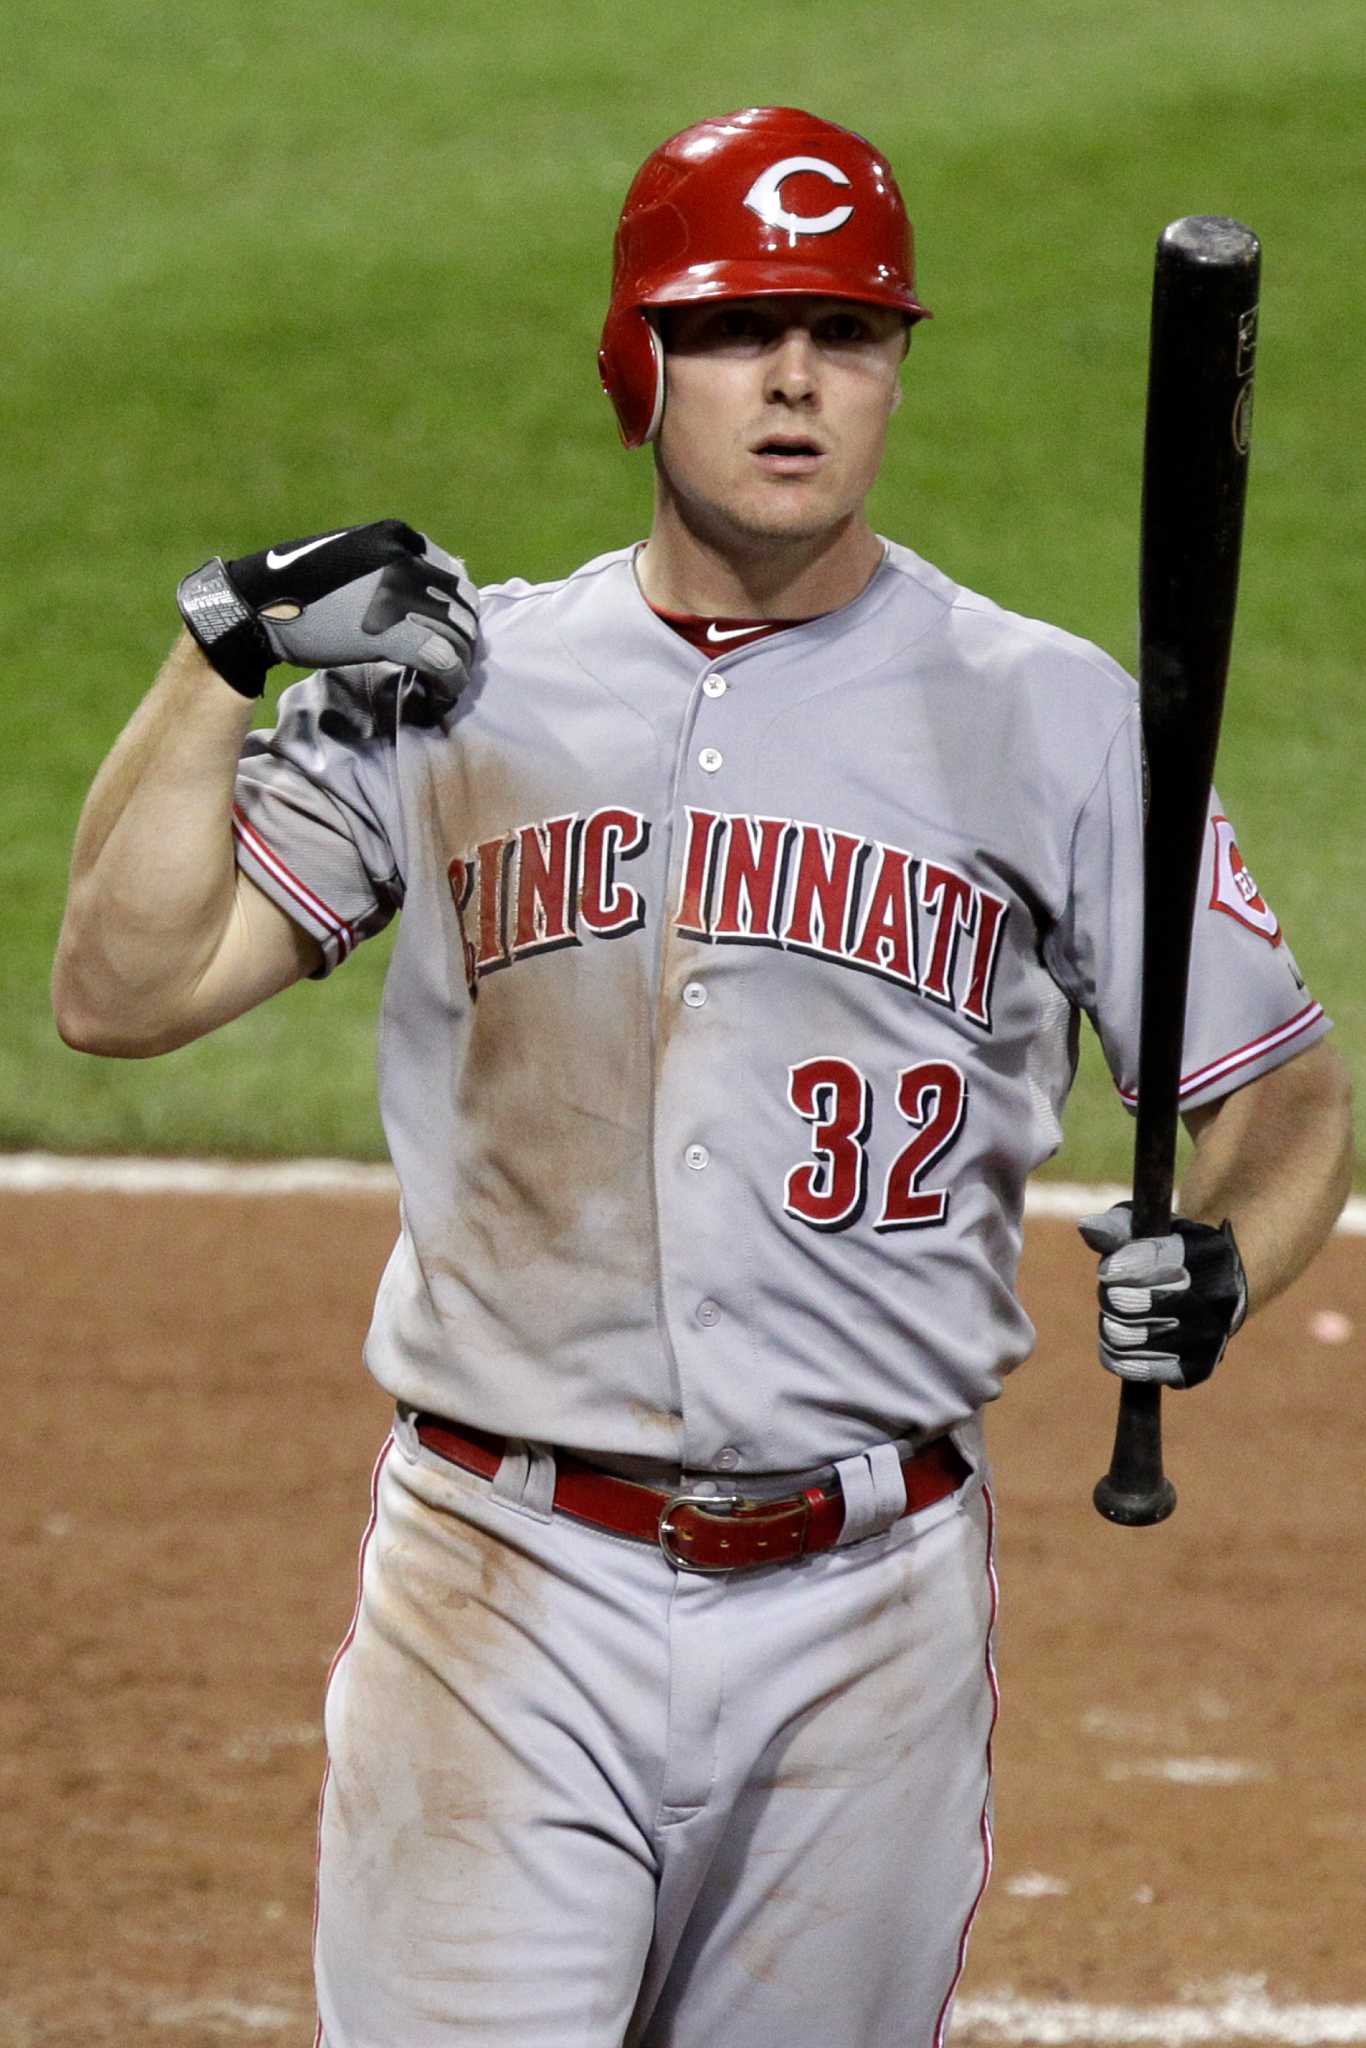 Source: Jay Bruce agrees to six-year, $51 million deal with Reds